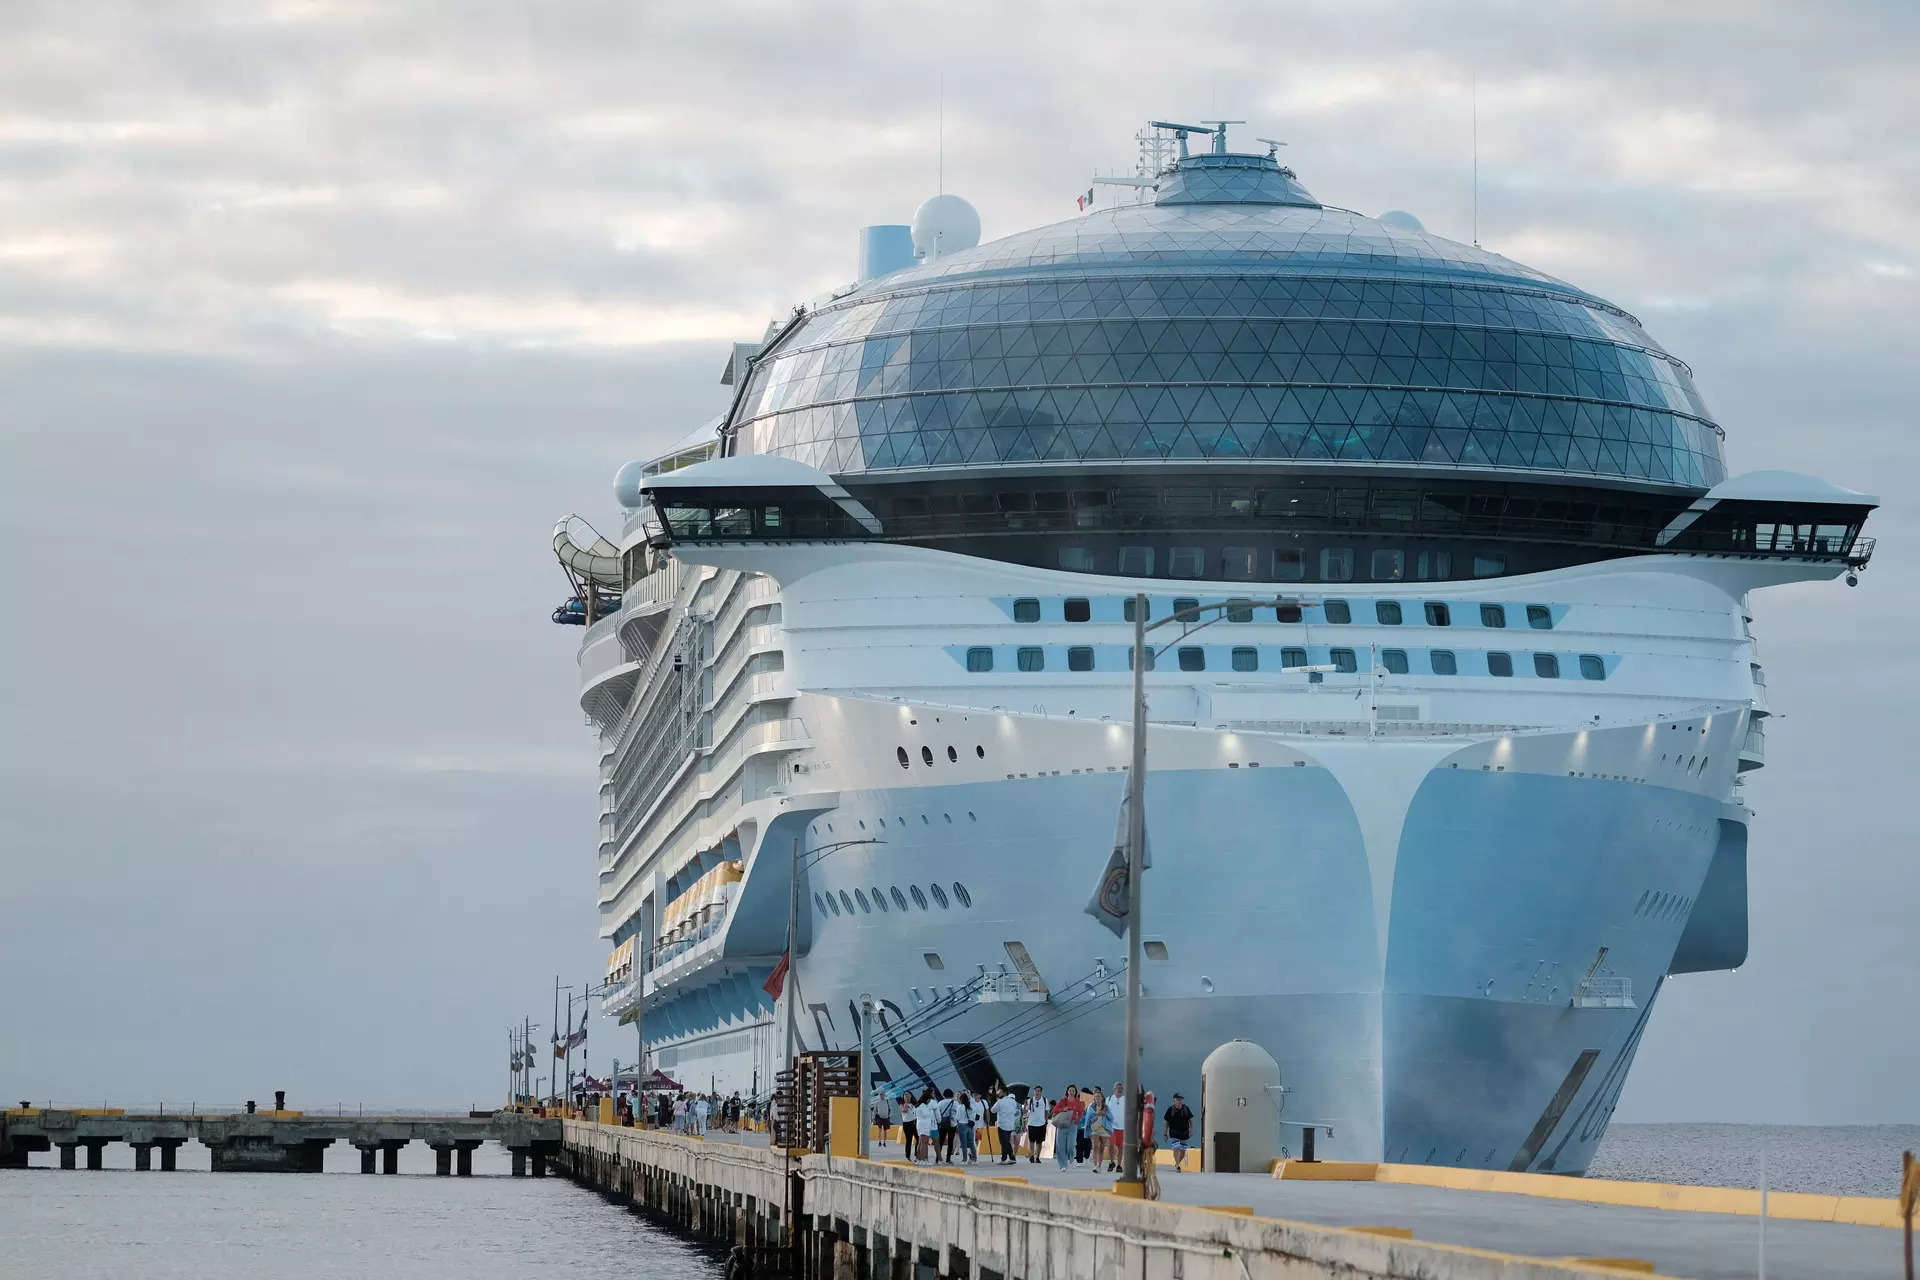 Royal Caribbean lifts profit view again on cruise boom, higher prices